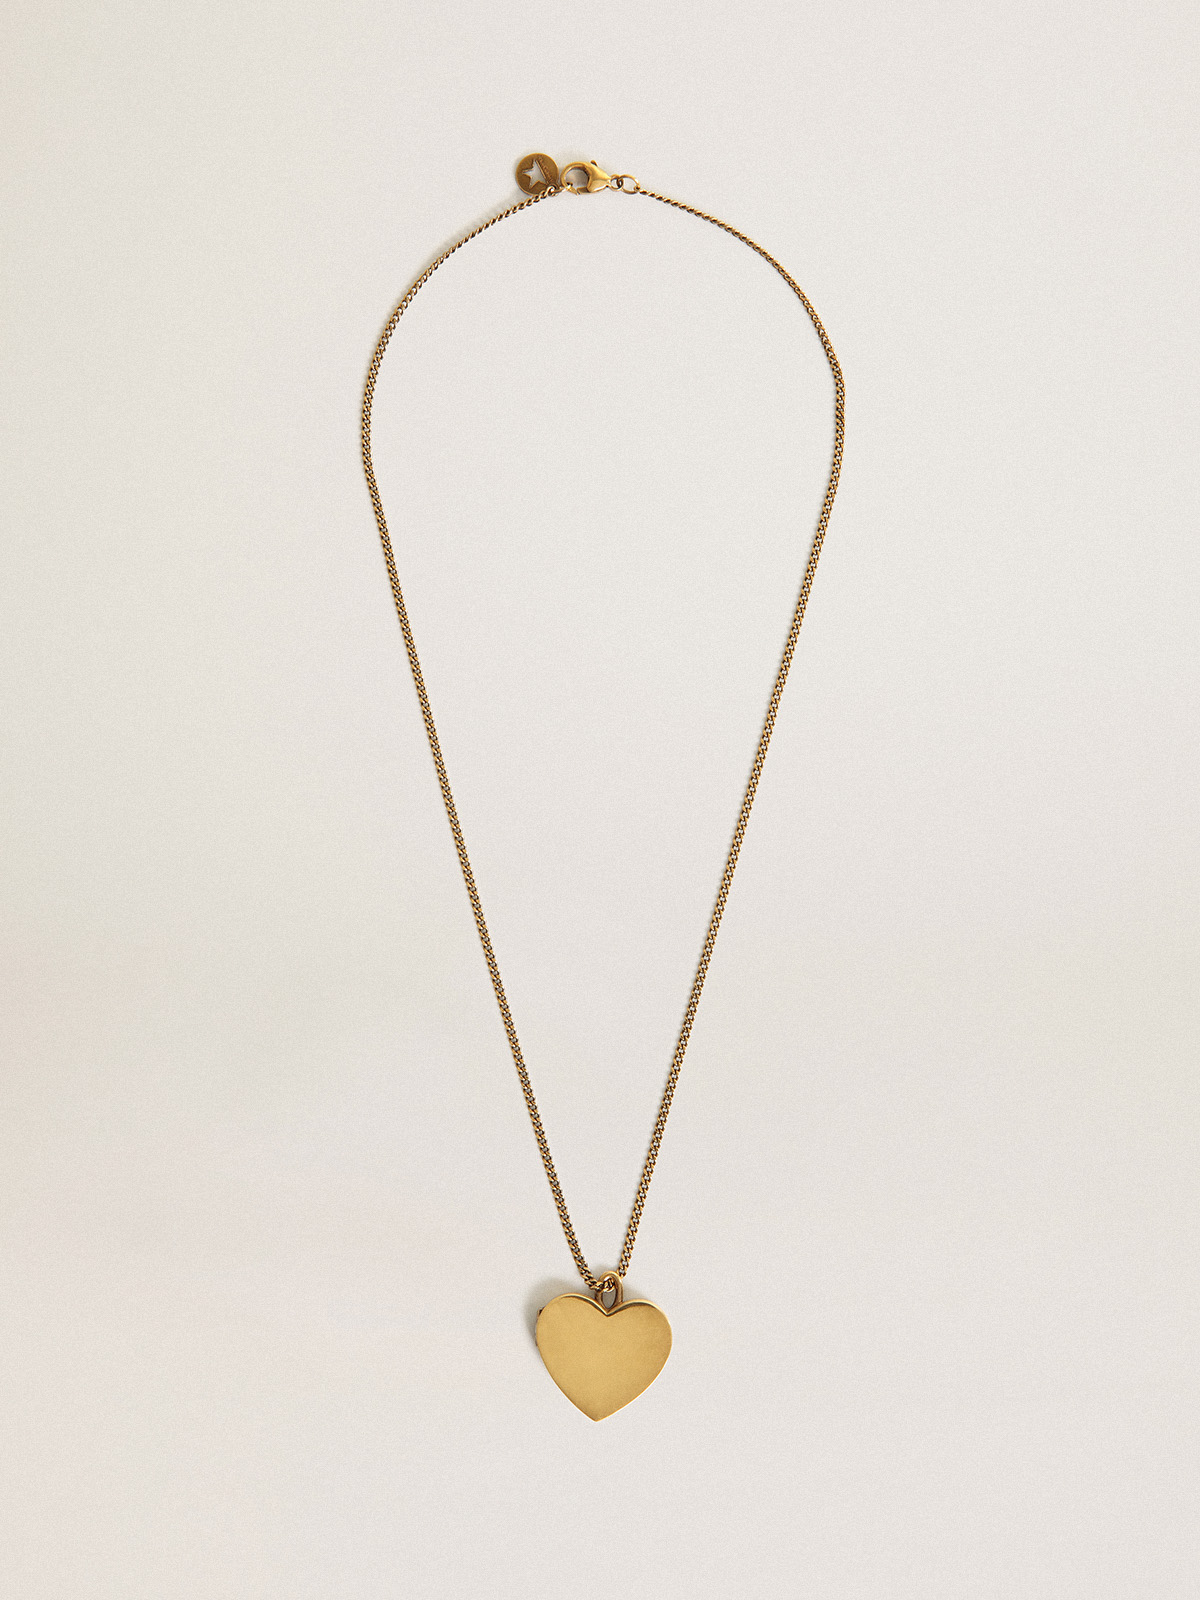 Golden Goose - Necklace in Antique Gold Color with Heart Charms, Woman, Size: U